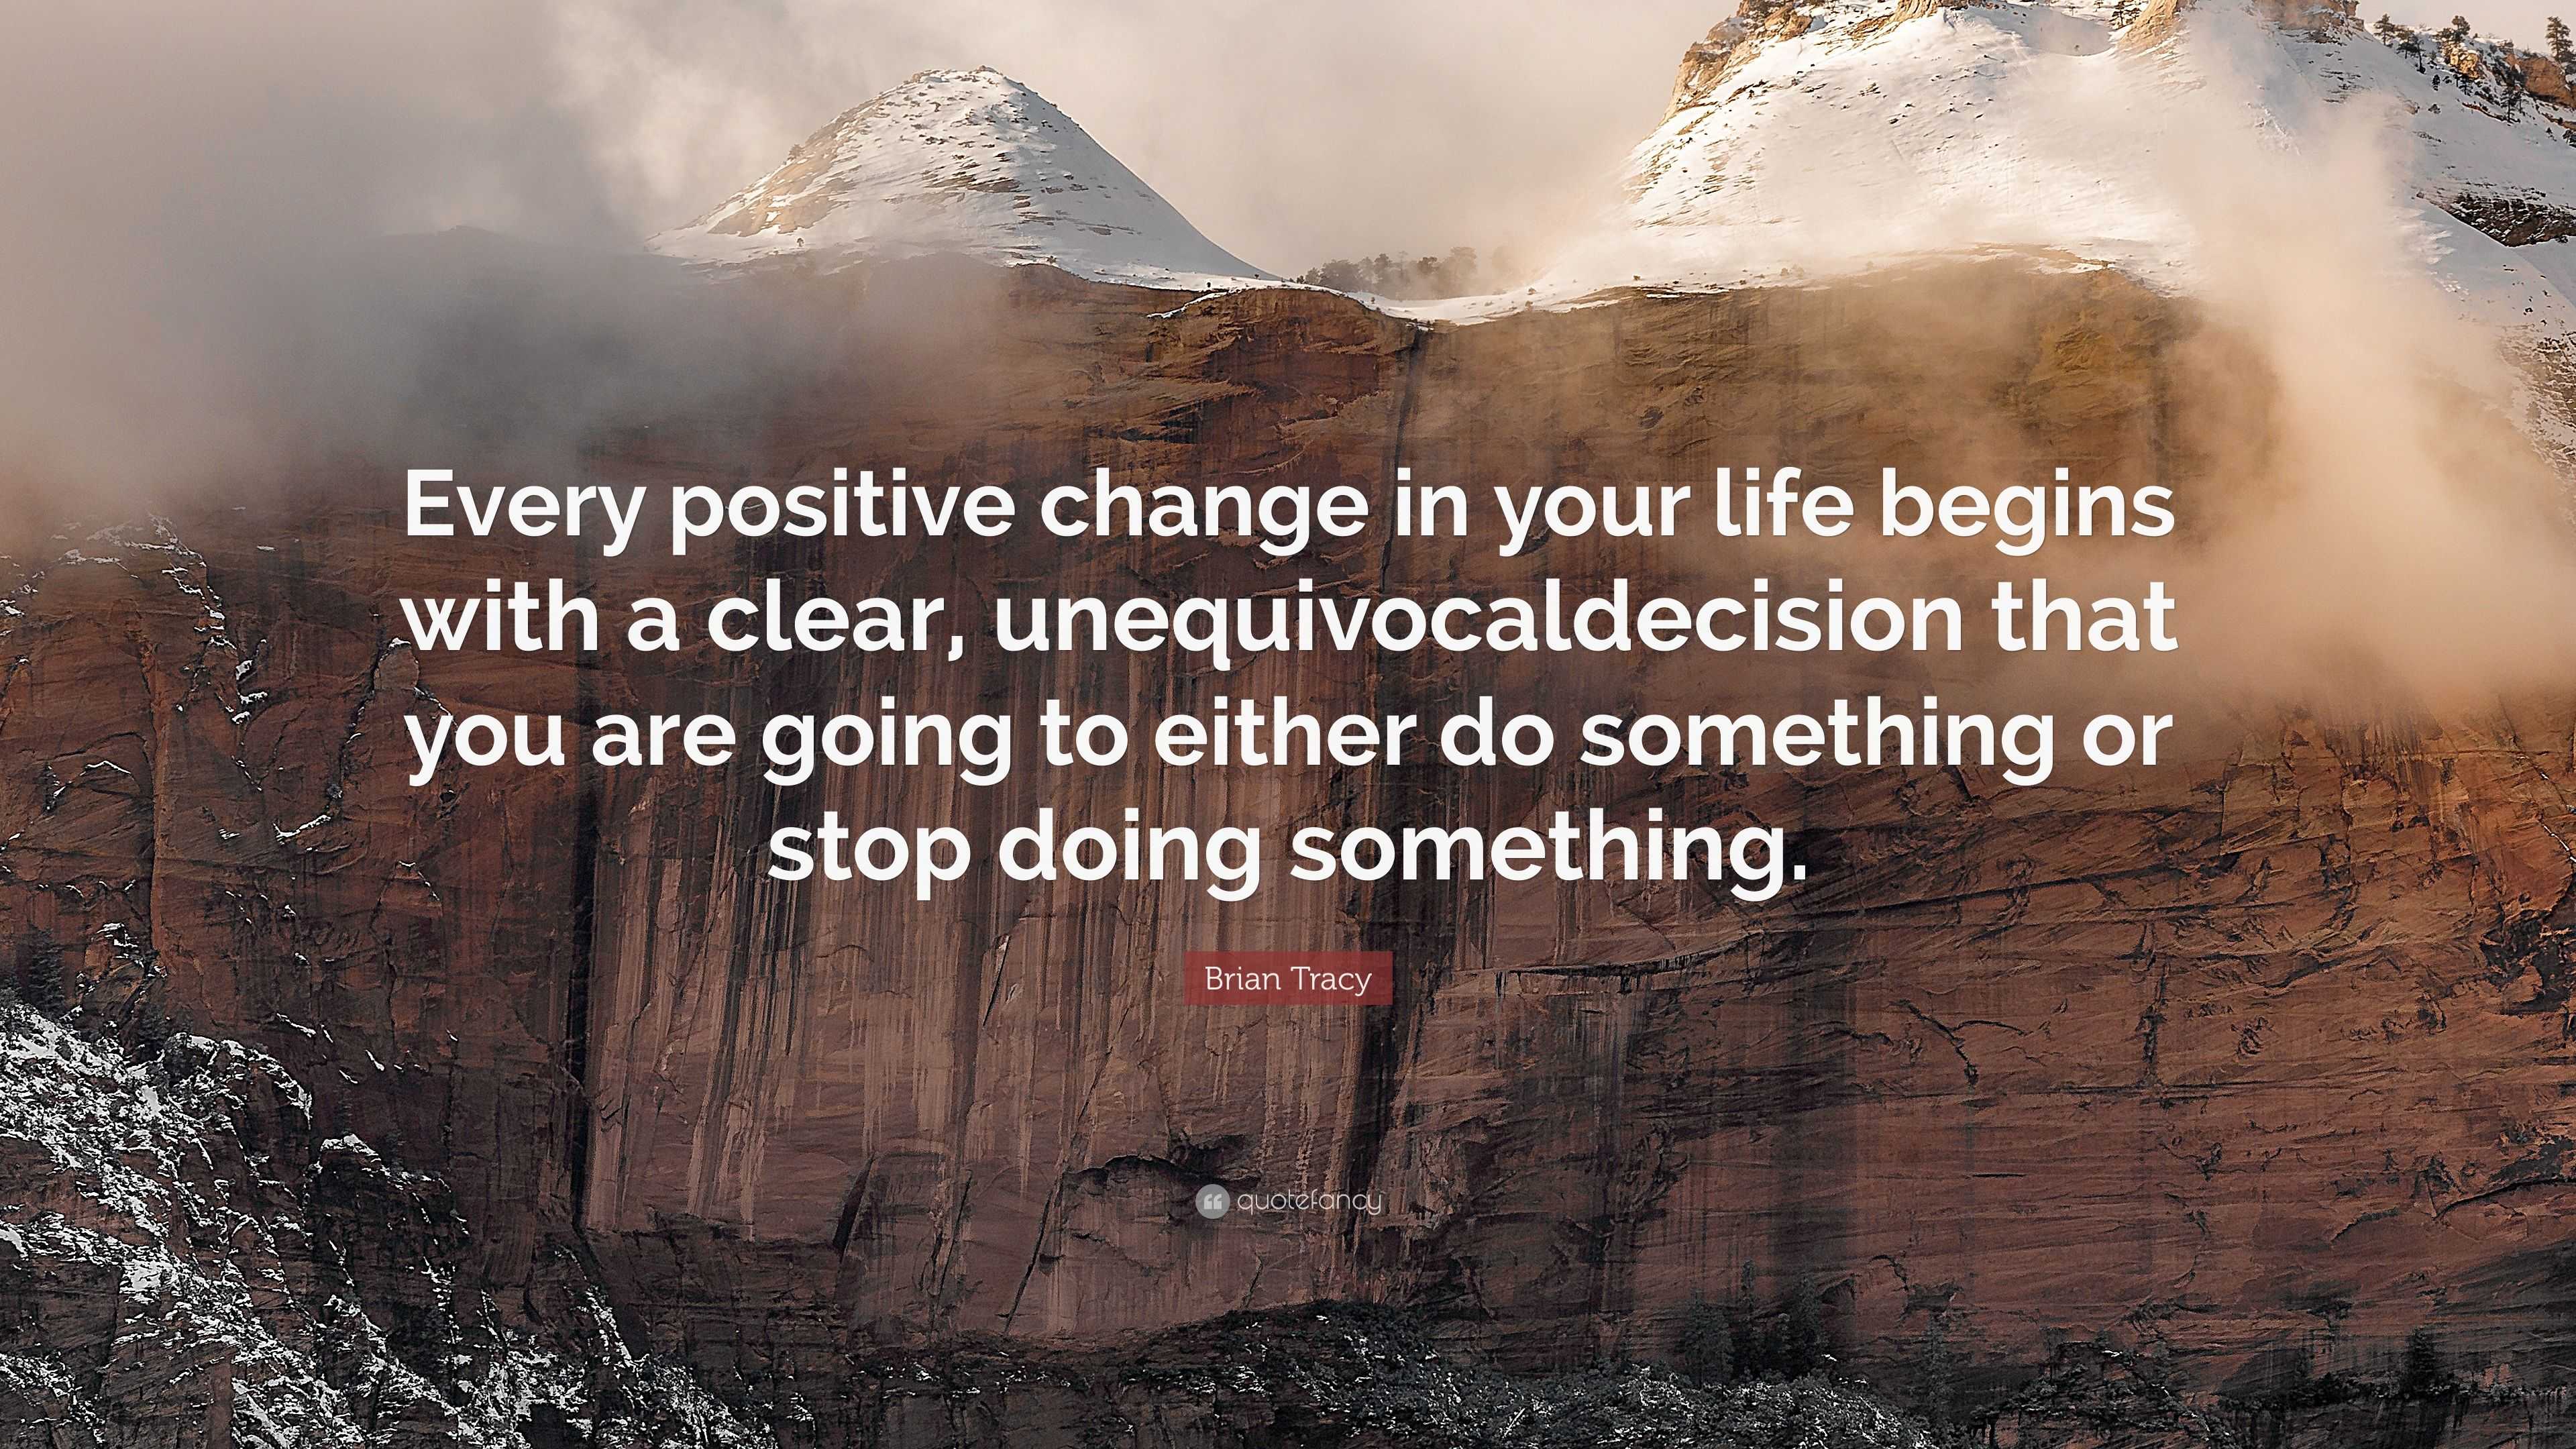 Brian Tracy Quote: “Every positive change in your life begins with a ...